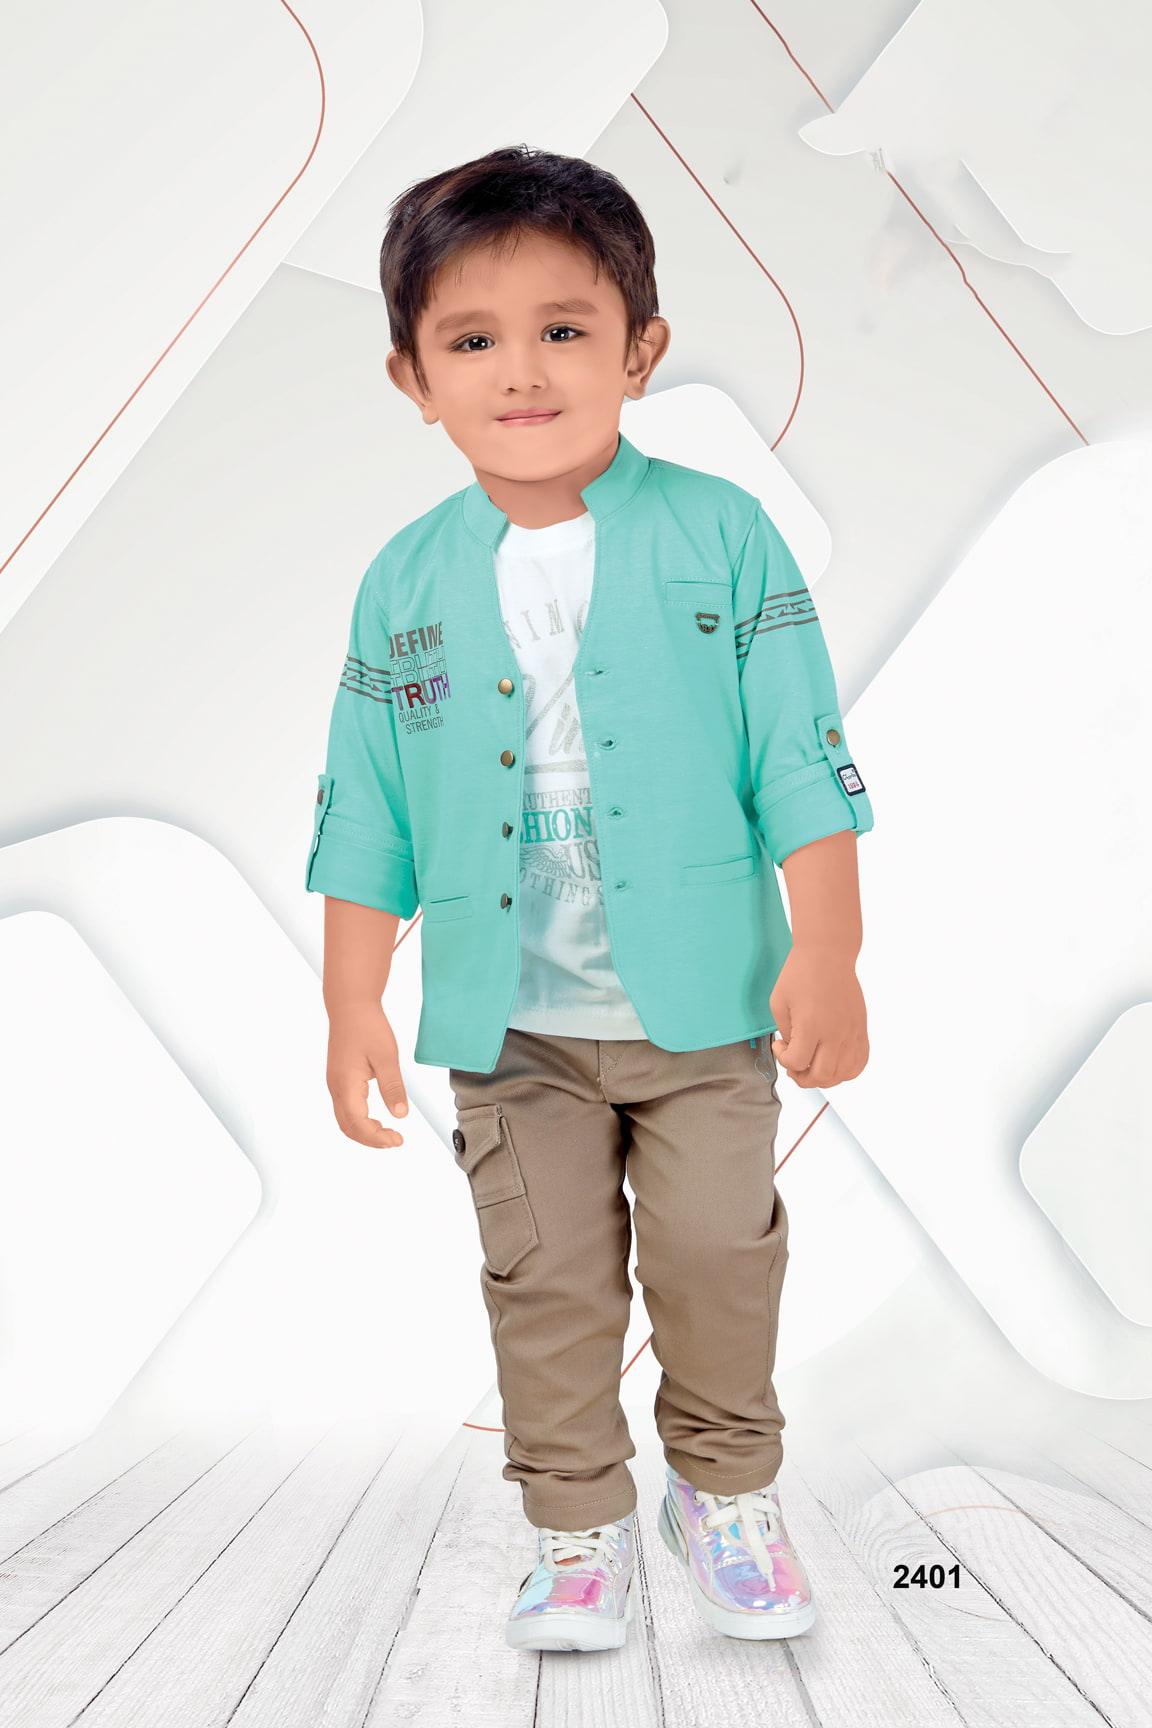 Stylish Blue Blazer With Printed White T-shirt And Beige Jeans Pant Set For Boys - Lagorii Kids